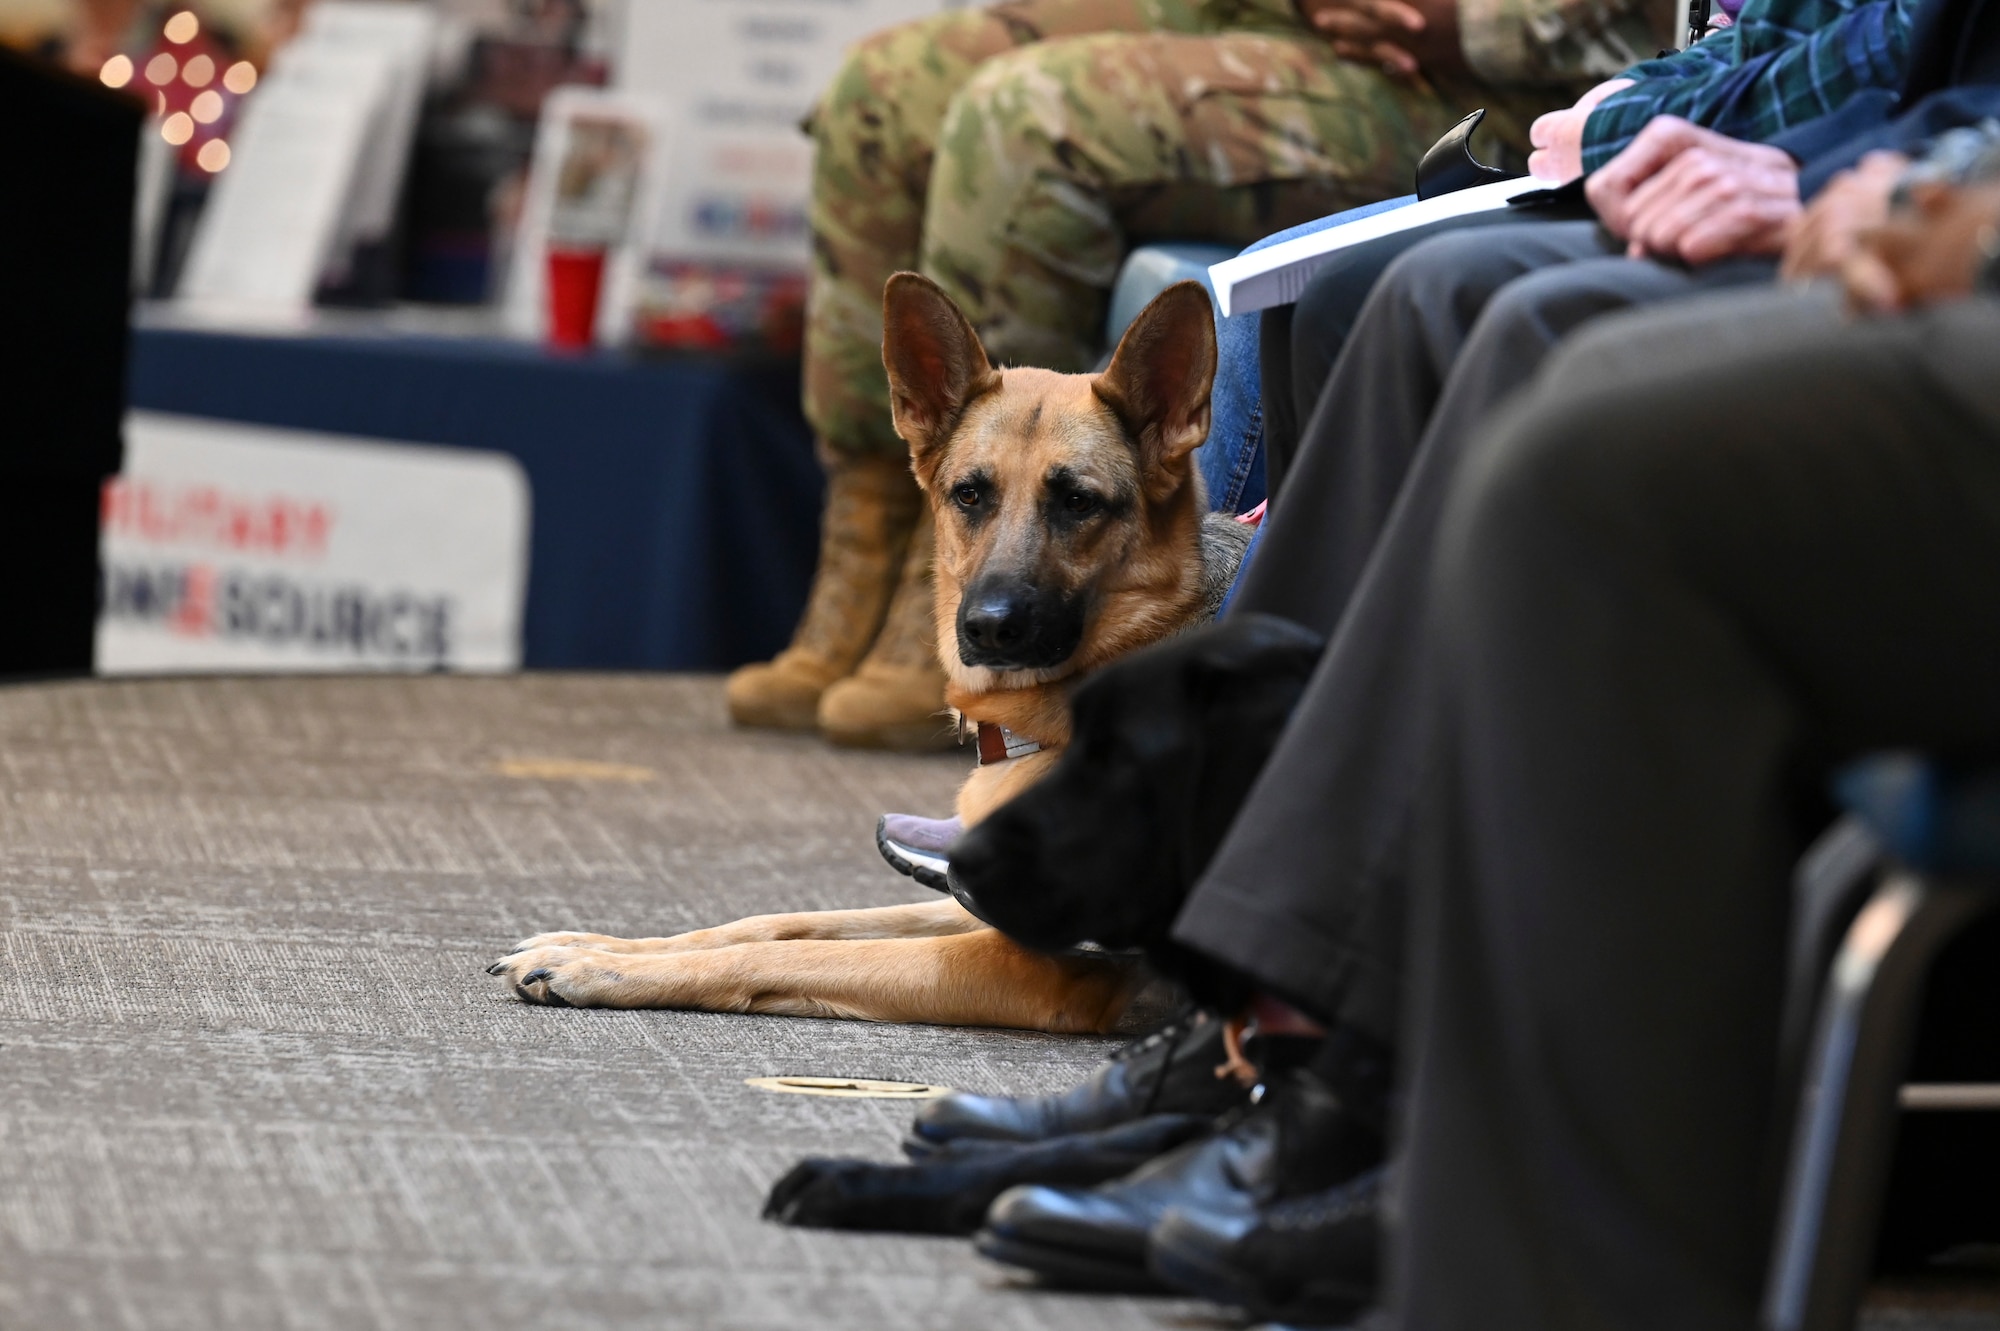 A service dog rests at its owner's feet.